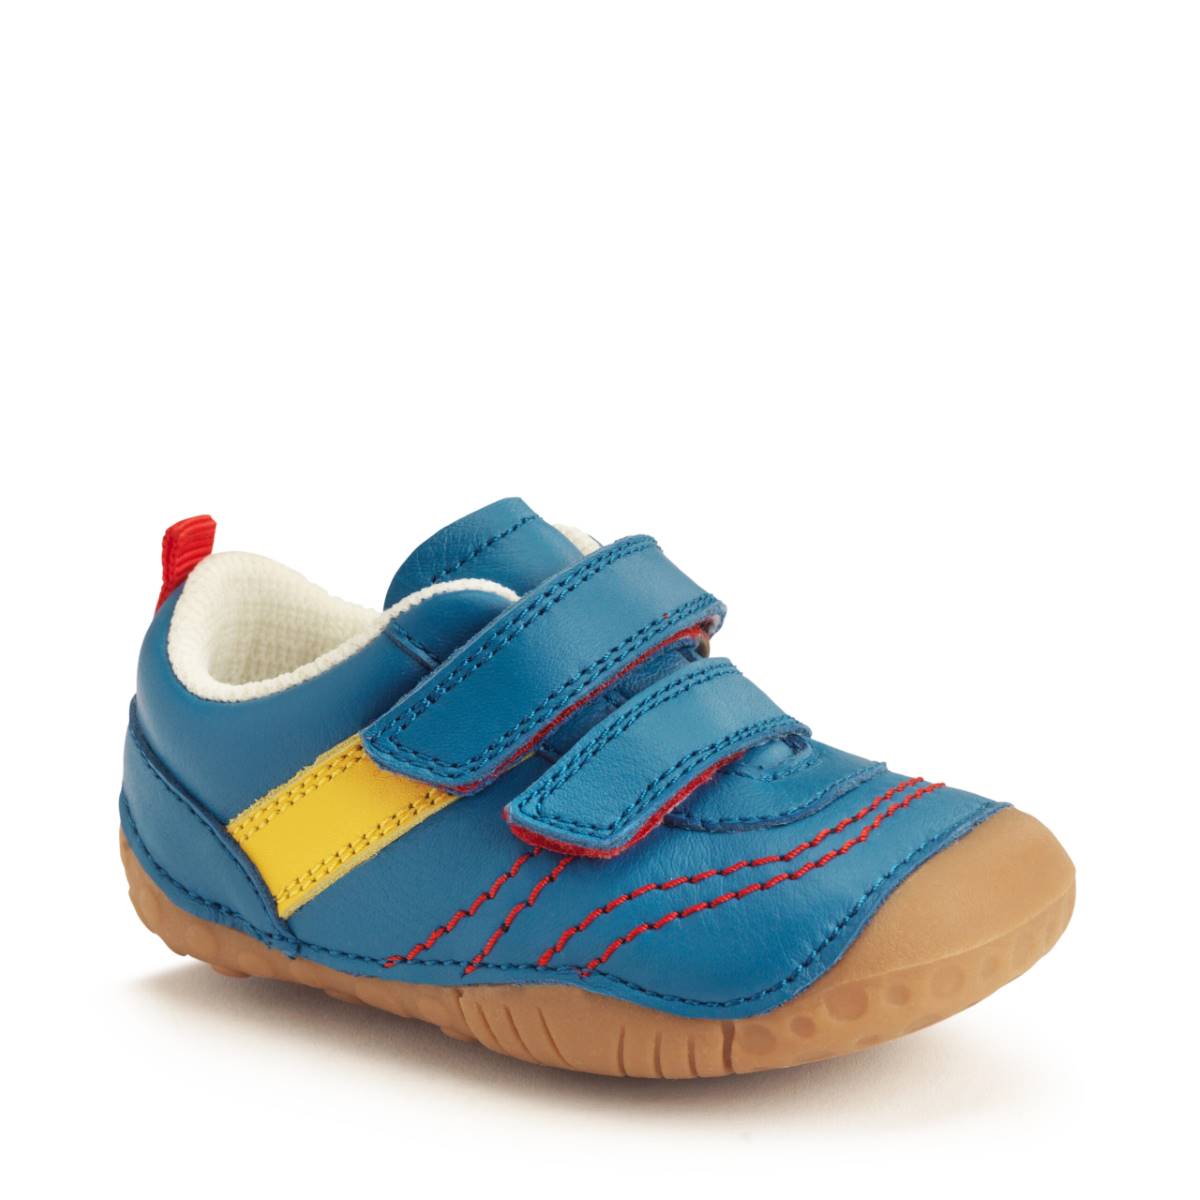 Start Rite Little Smile 2v BLUE LEATHER Kids Boys First Shoes 0823-26F in a Plain Leather in Size 2.5